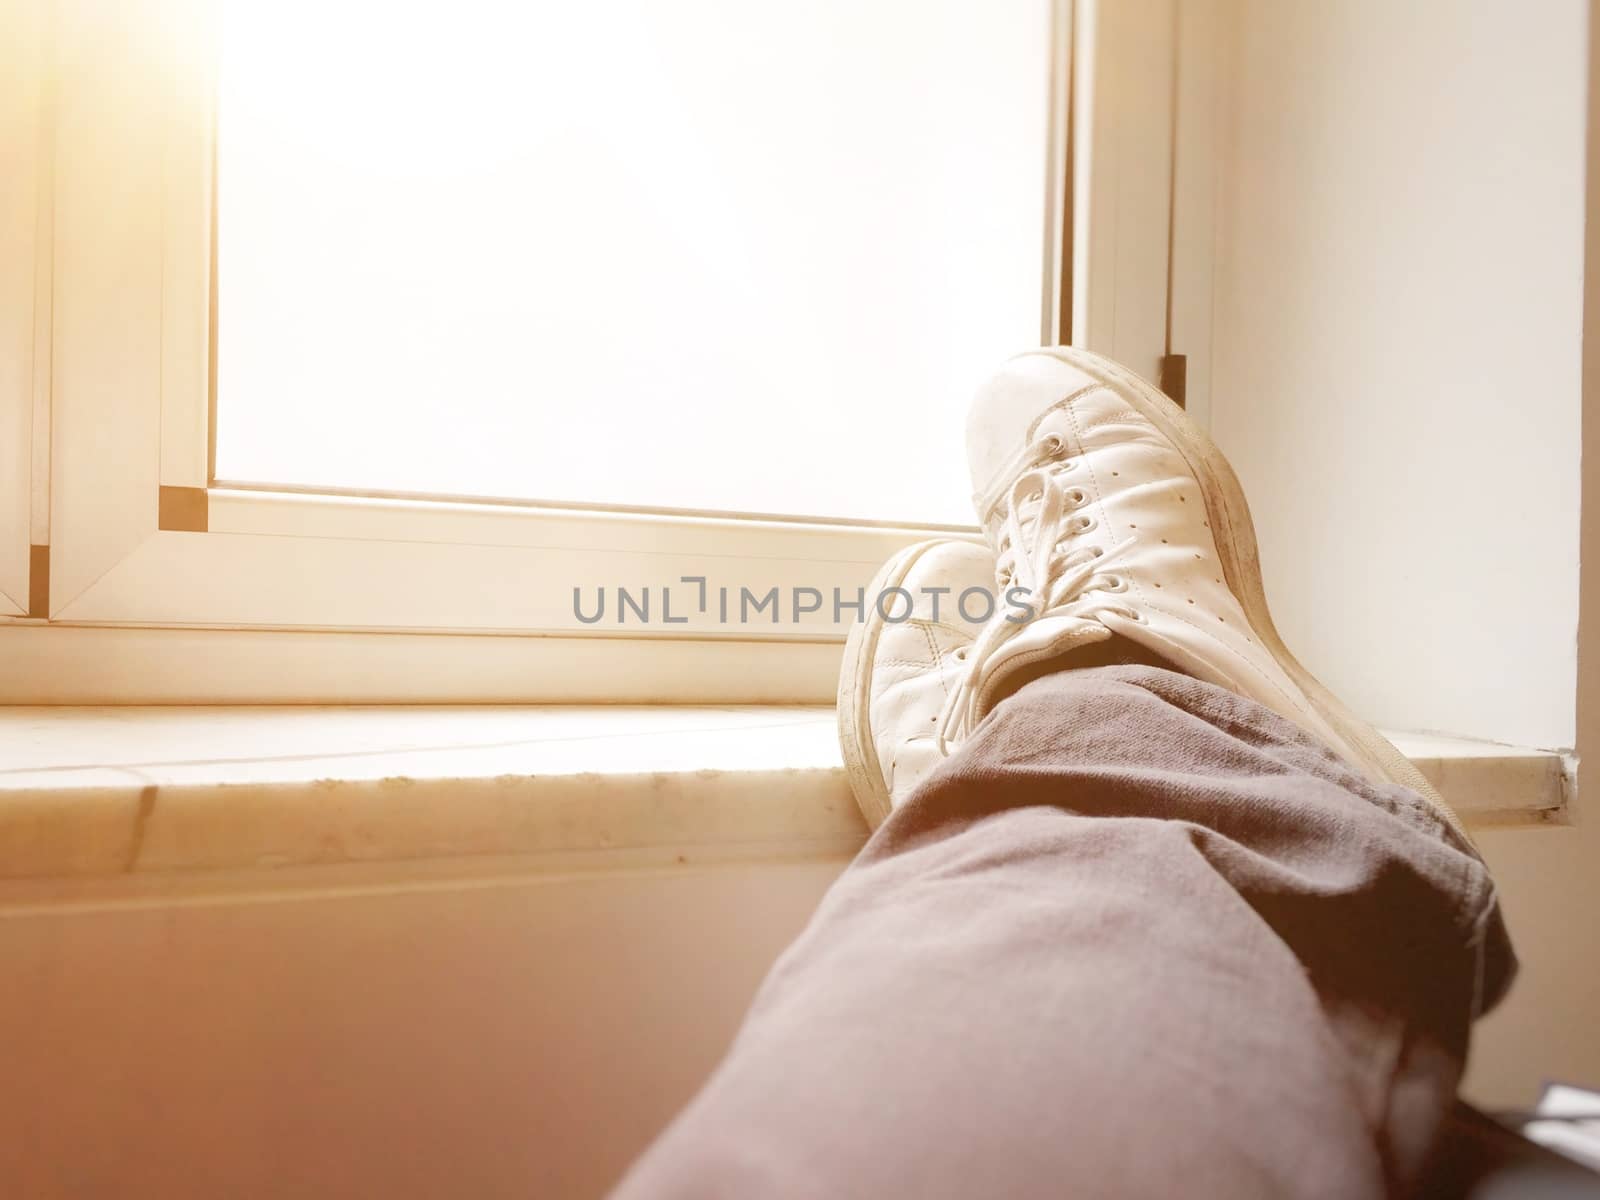 Feet crossed in front of a closed window by rarrarorro